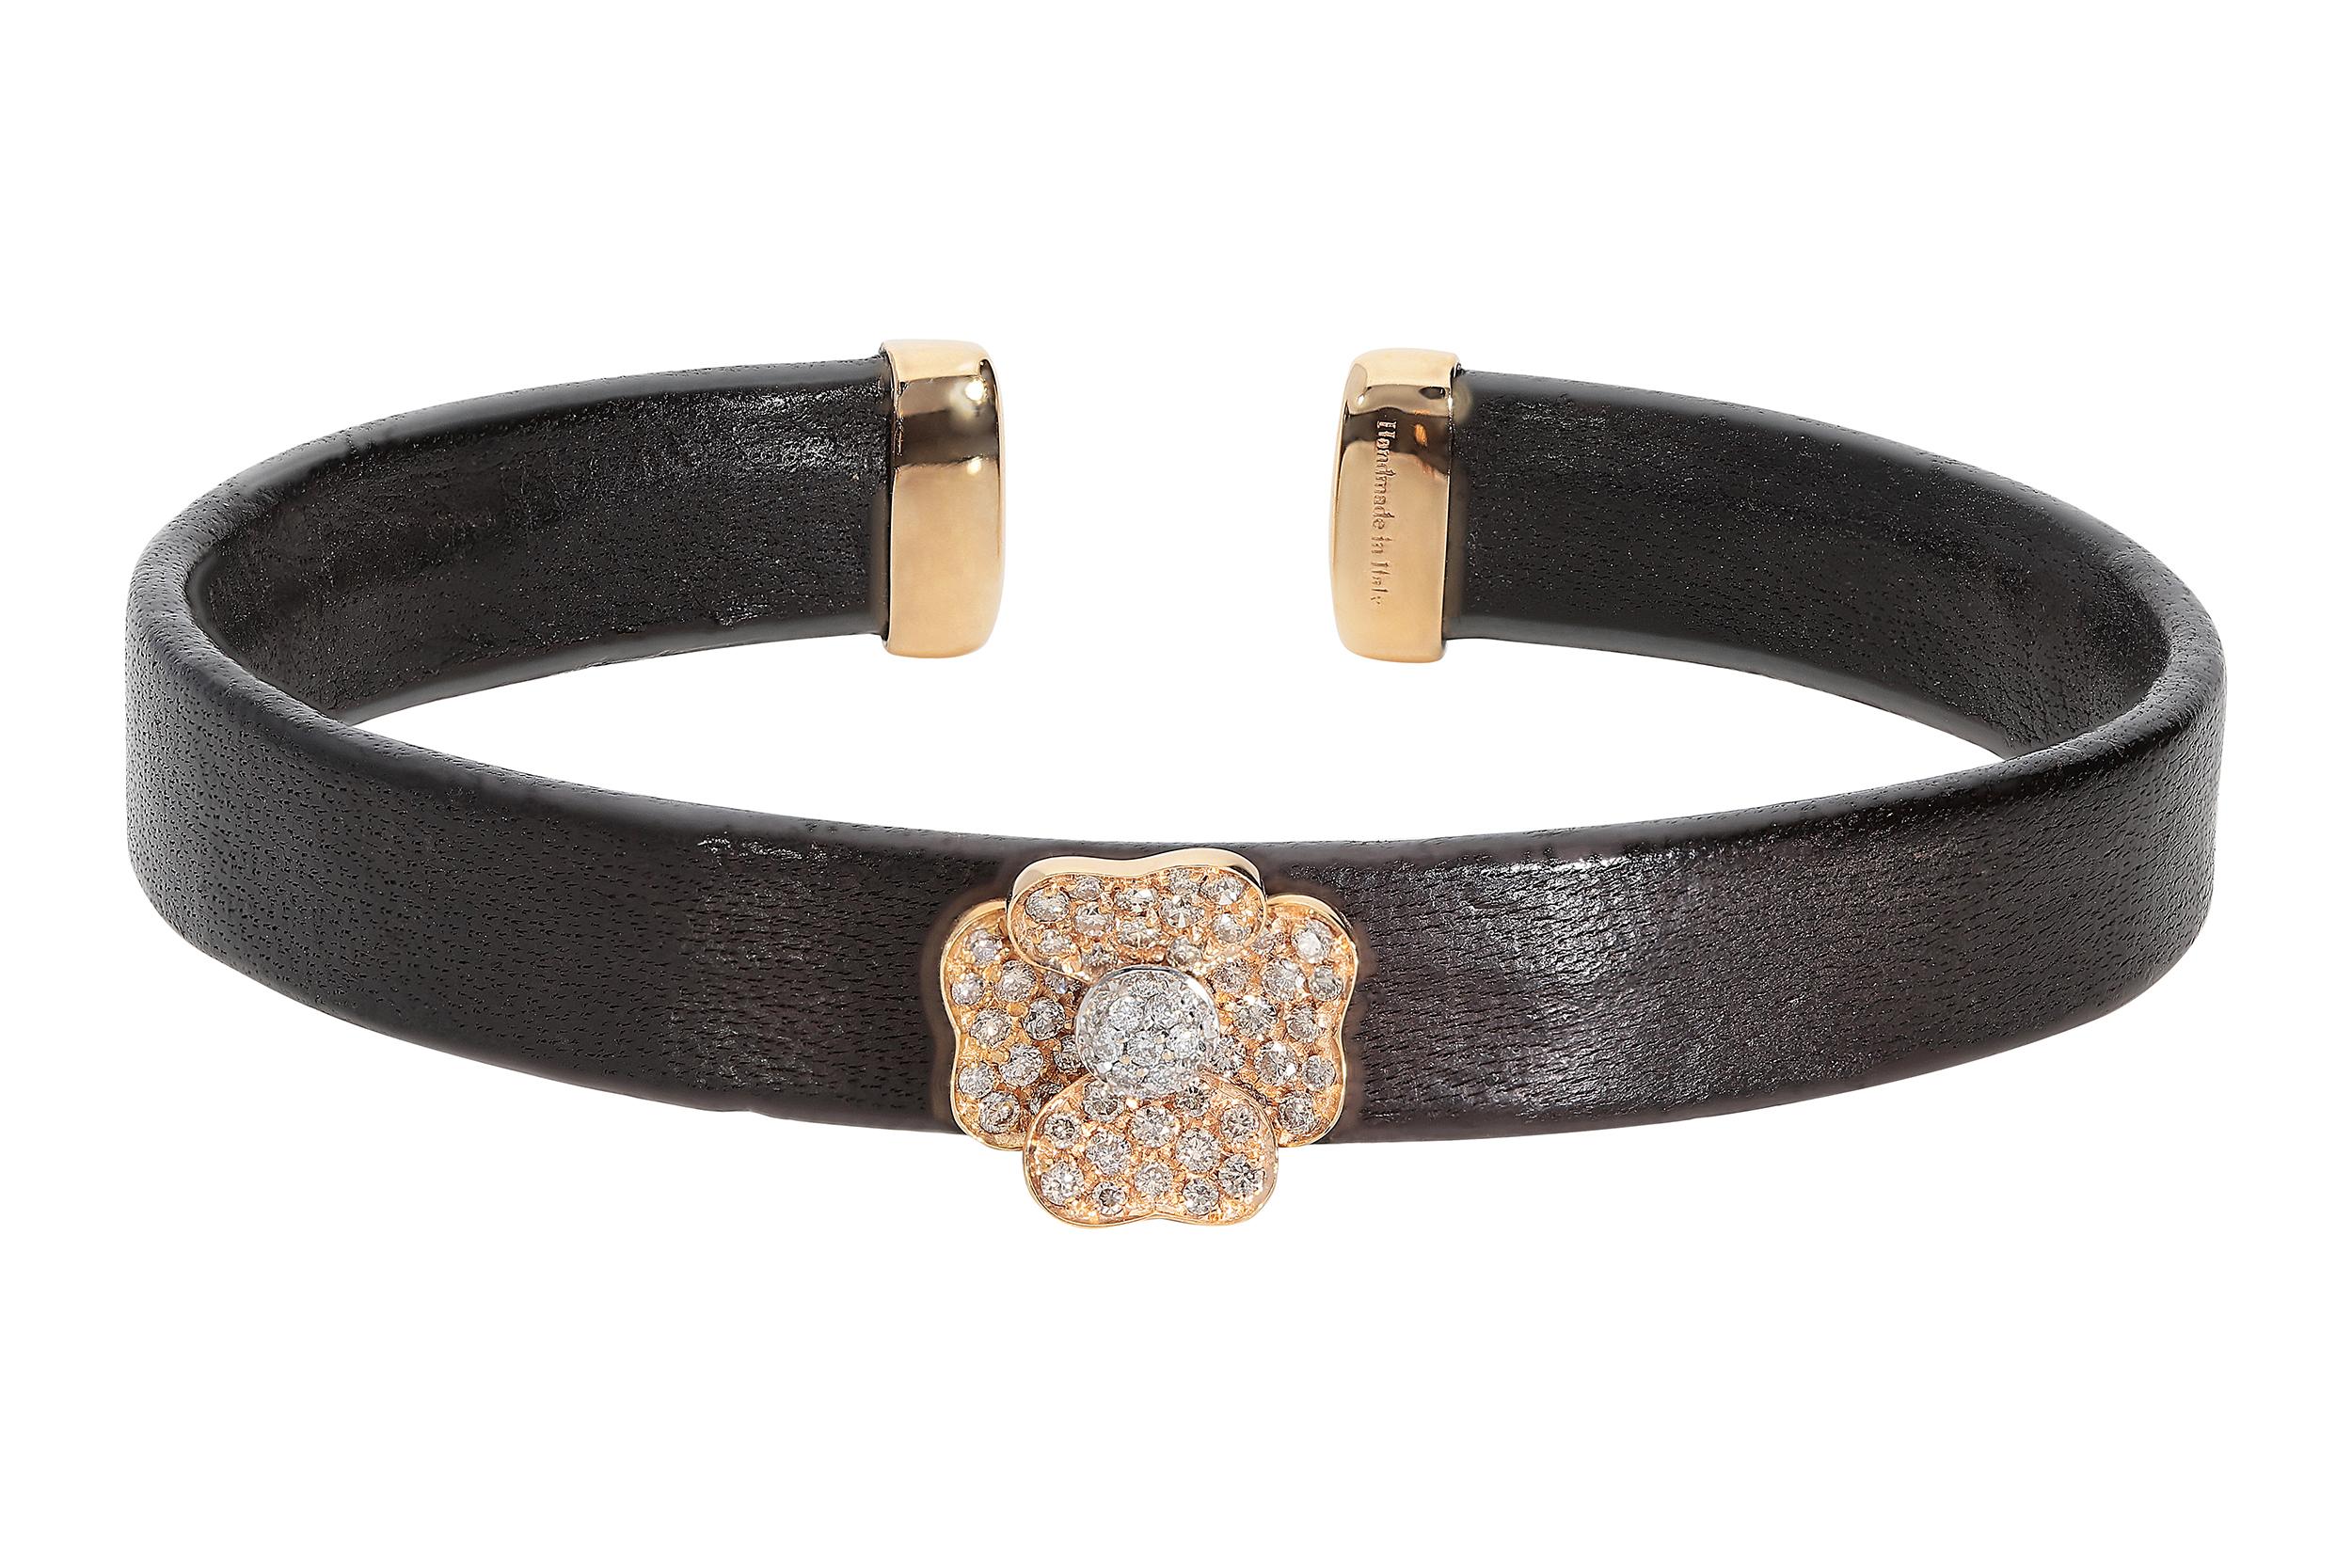 Fashion bracelet in 18kt pink gold for 3,10 grams with flexible core brown leather.
The height of the leather is 0,90 centimeters and the wrist size is 5.50x4.50 centimeters.
The flower has got the pistil set with 0,05 carats of white round